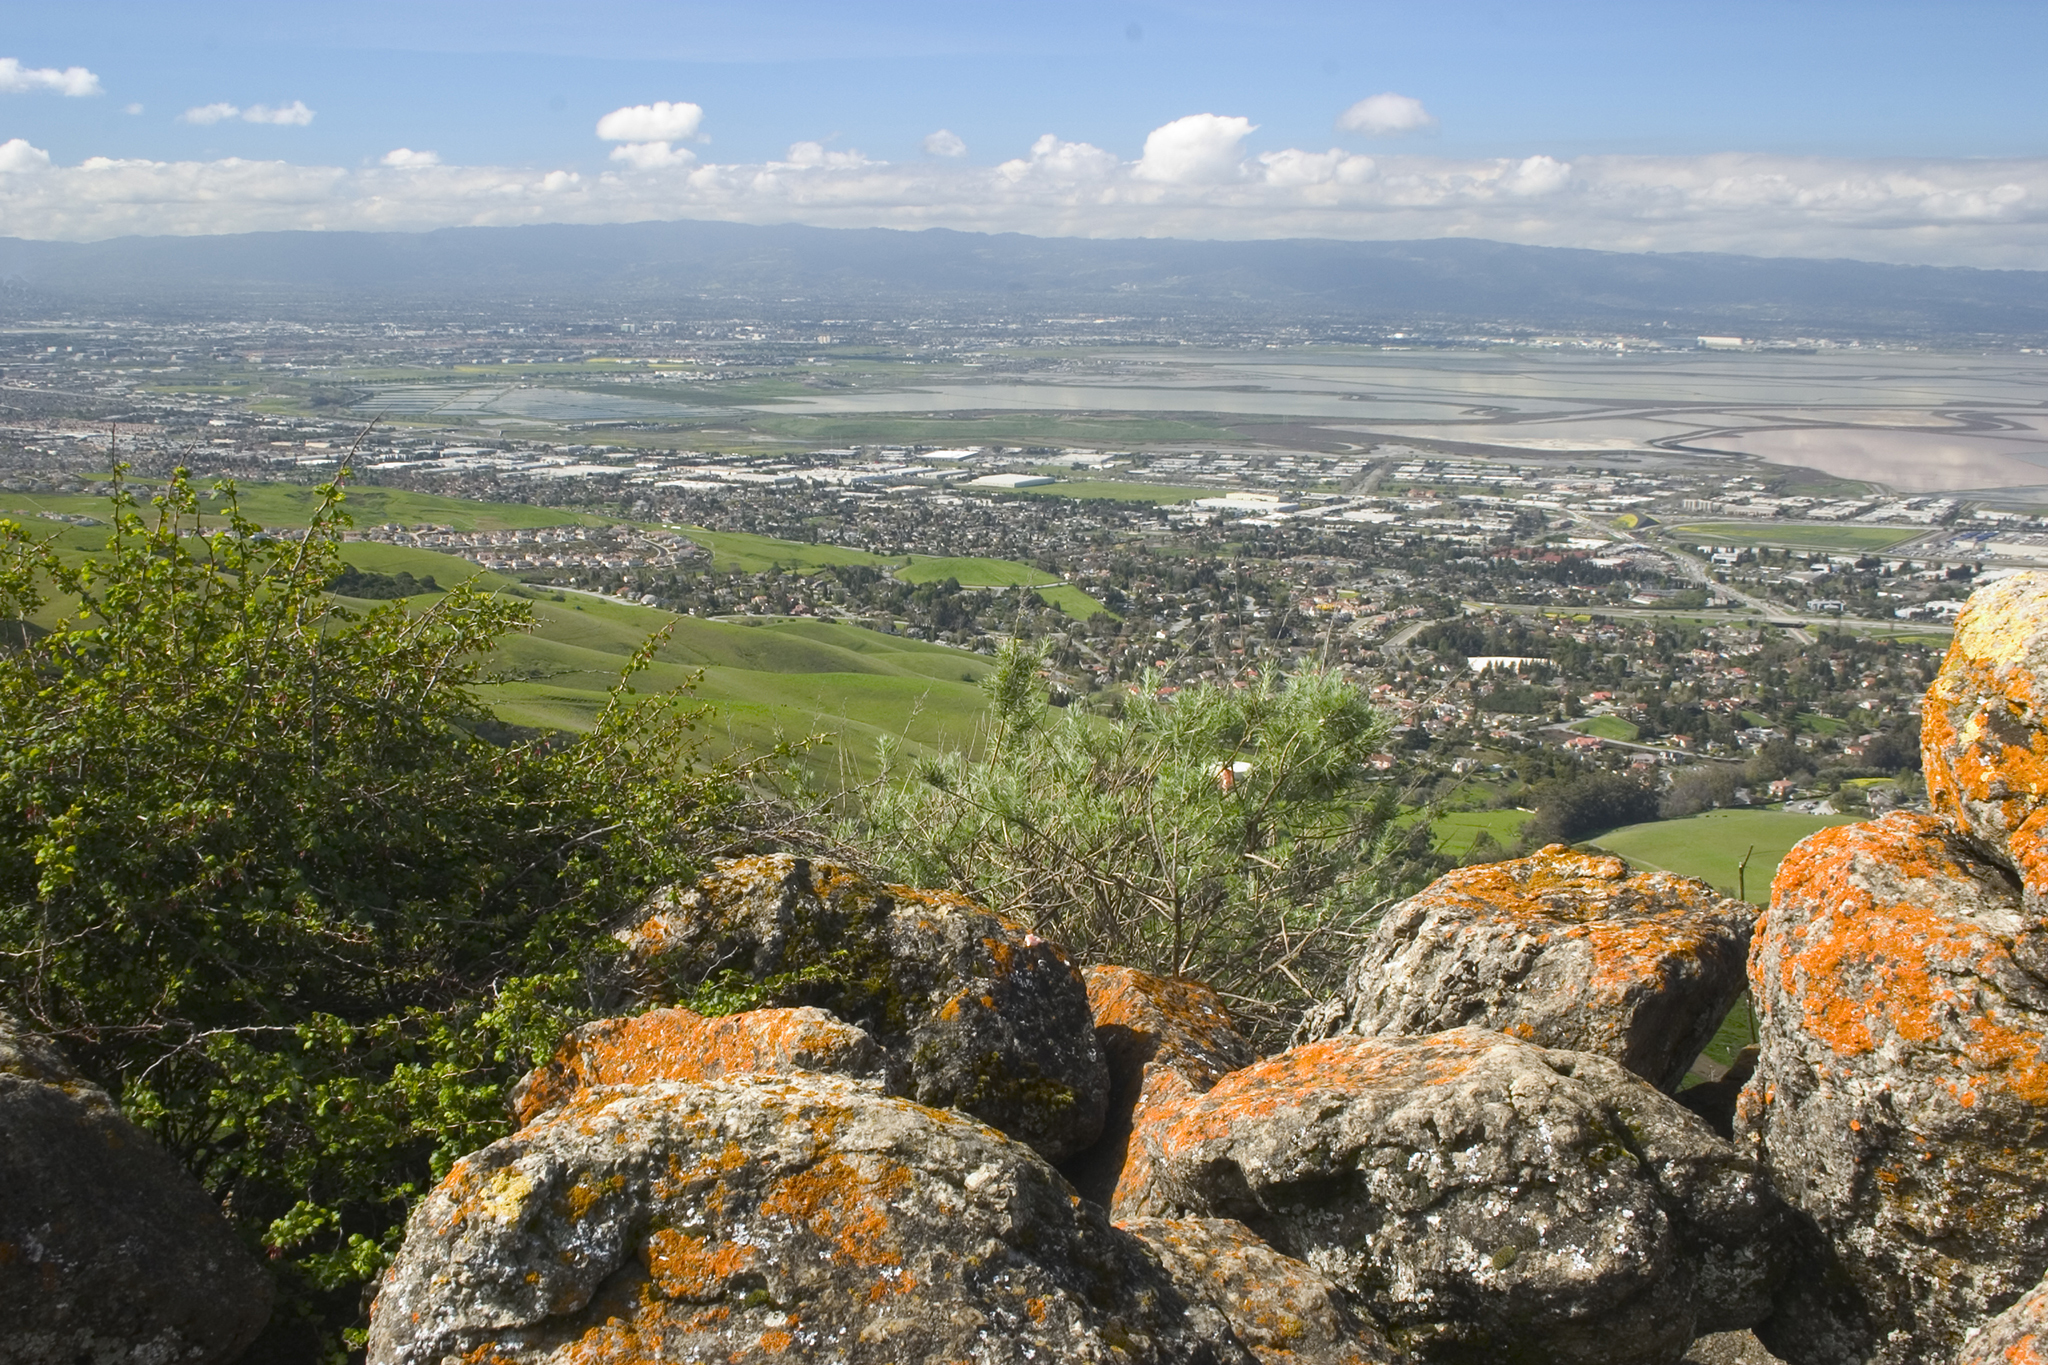 Mission Peak hike reveals views from Bay Area's past